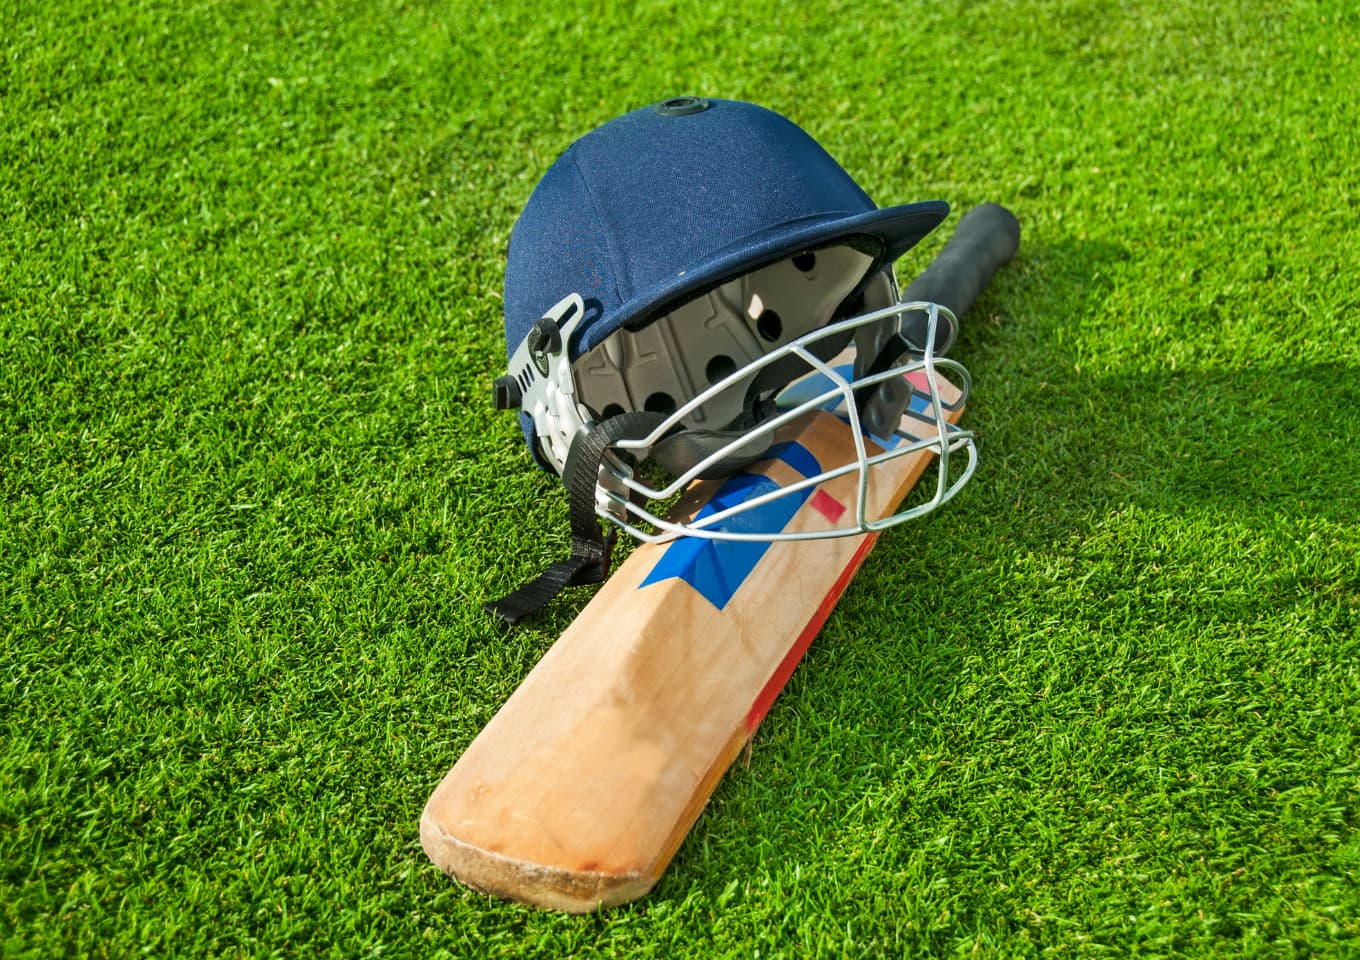 Cricket helmet resting on a cricket bat placed on bright green cricket pitch.